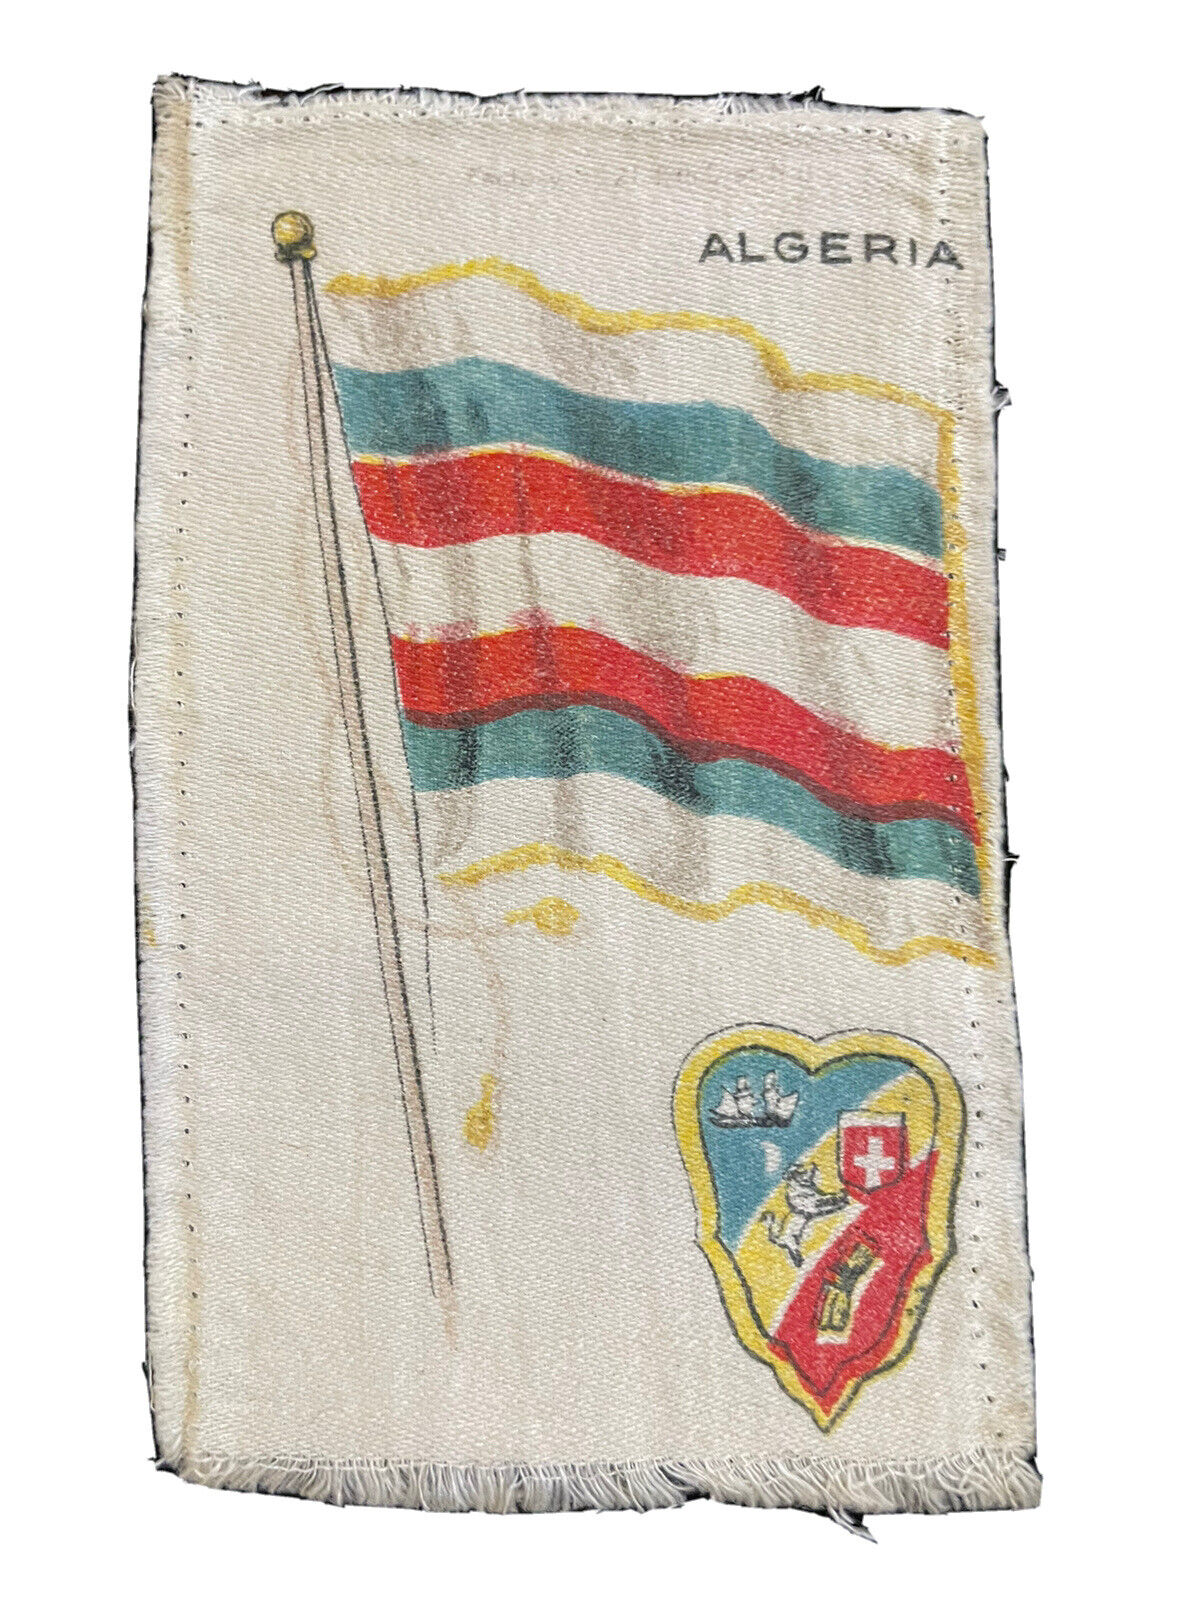 France French Algeria Naval Flag Coat of Arms 1848-1910 Tobacco Silk Cigarettes